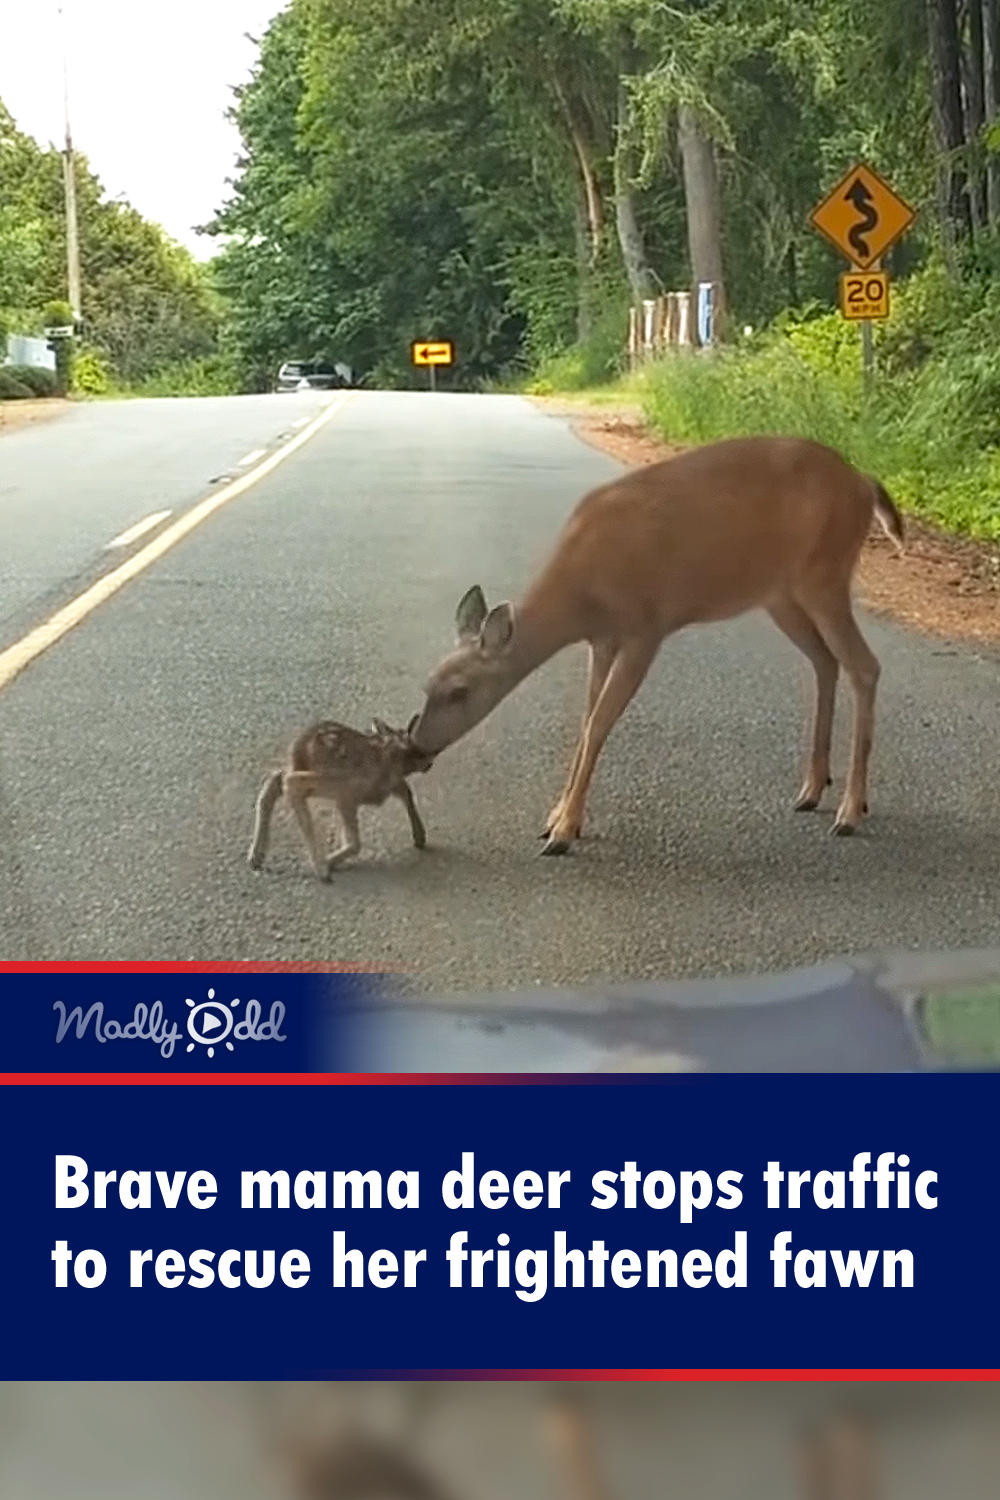 Brave mama deer stops traffic to rescue her frightened fawn